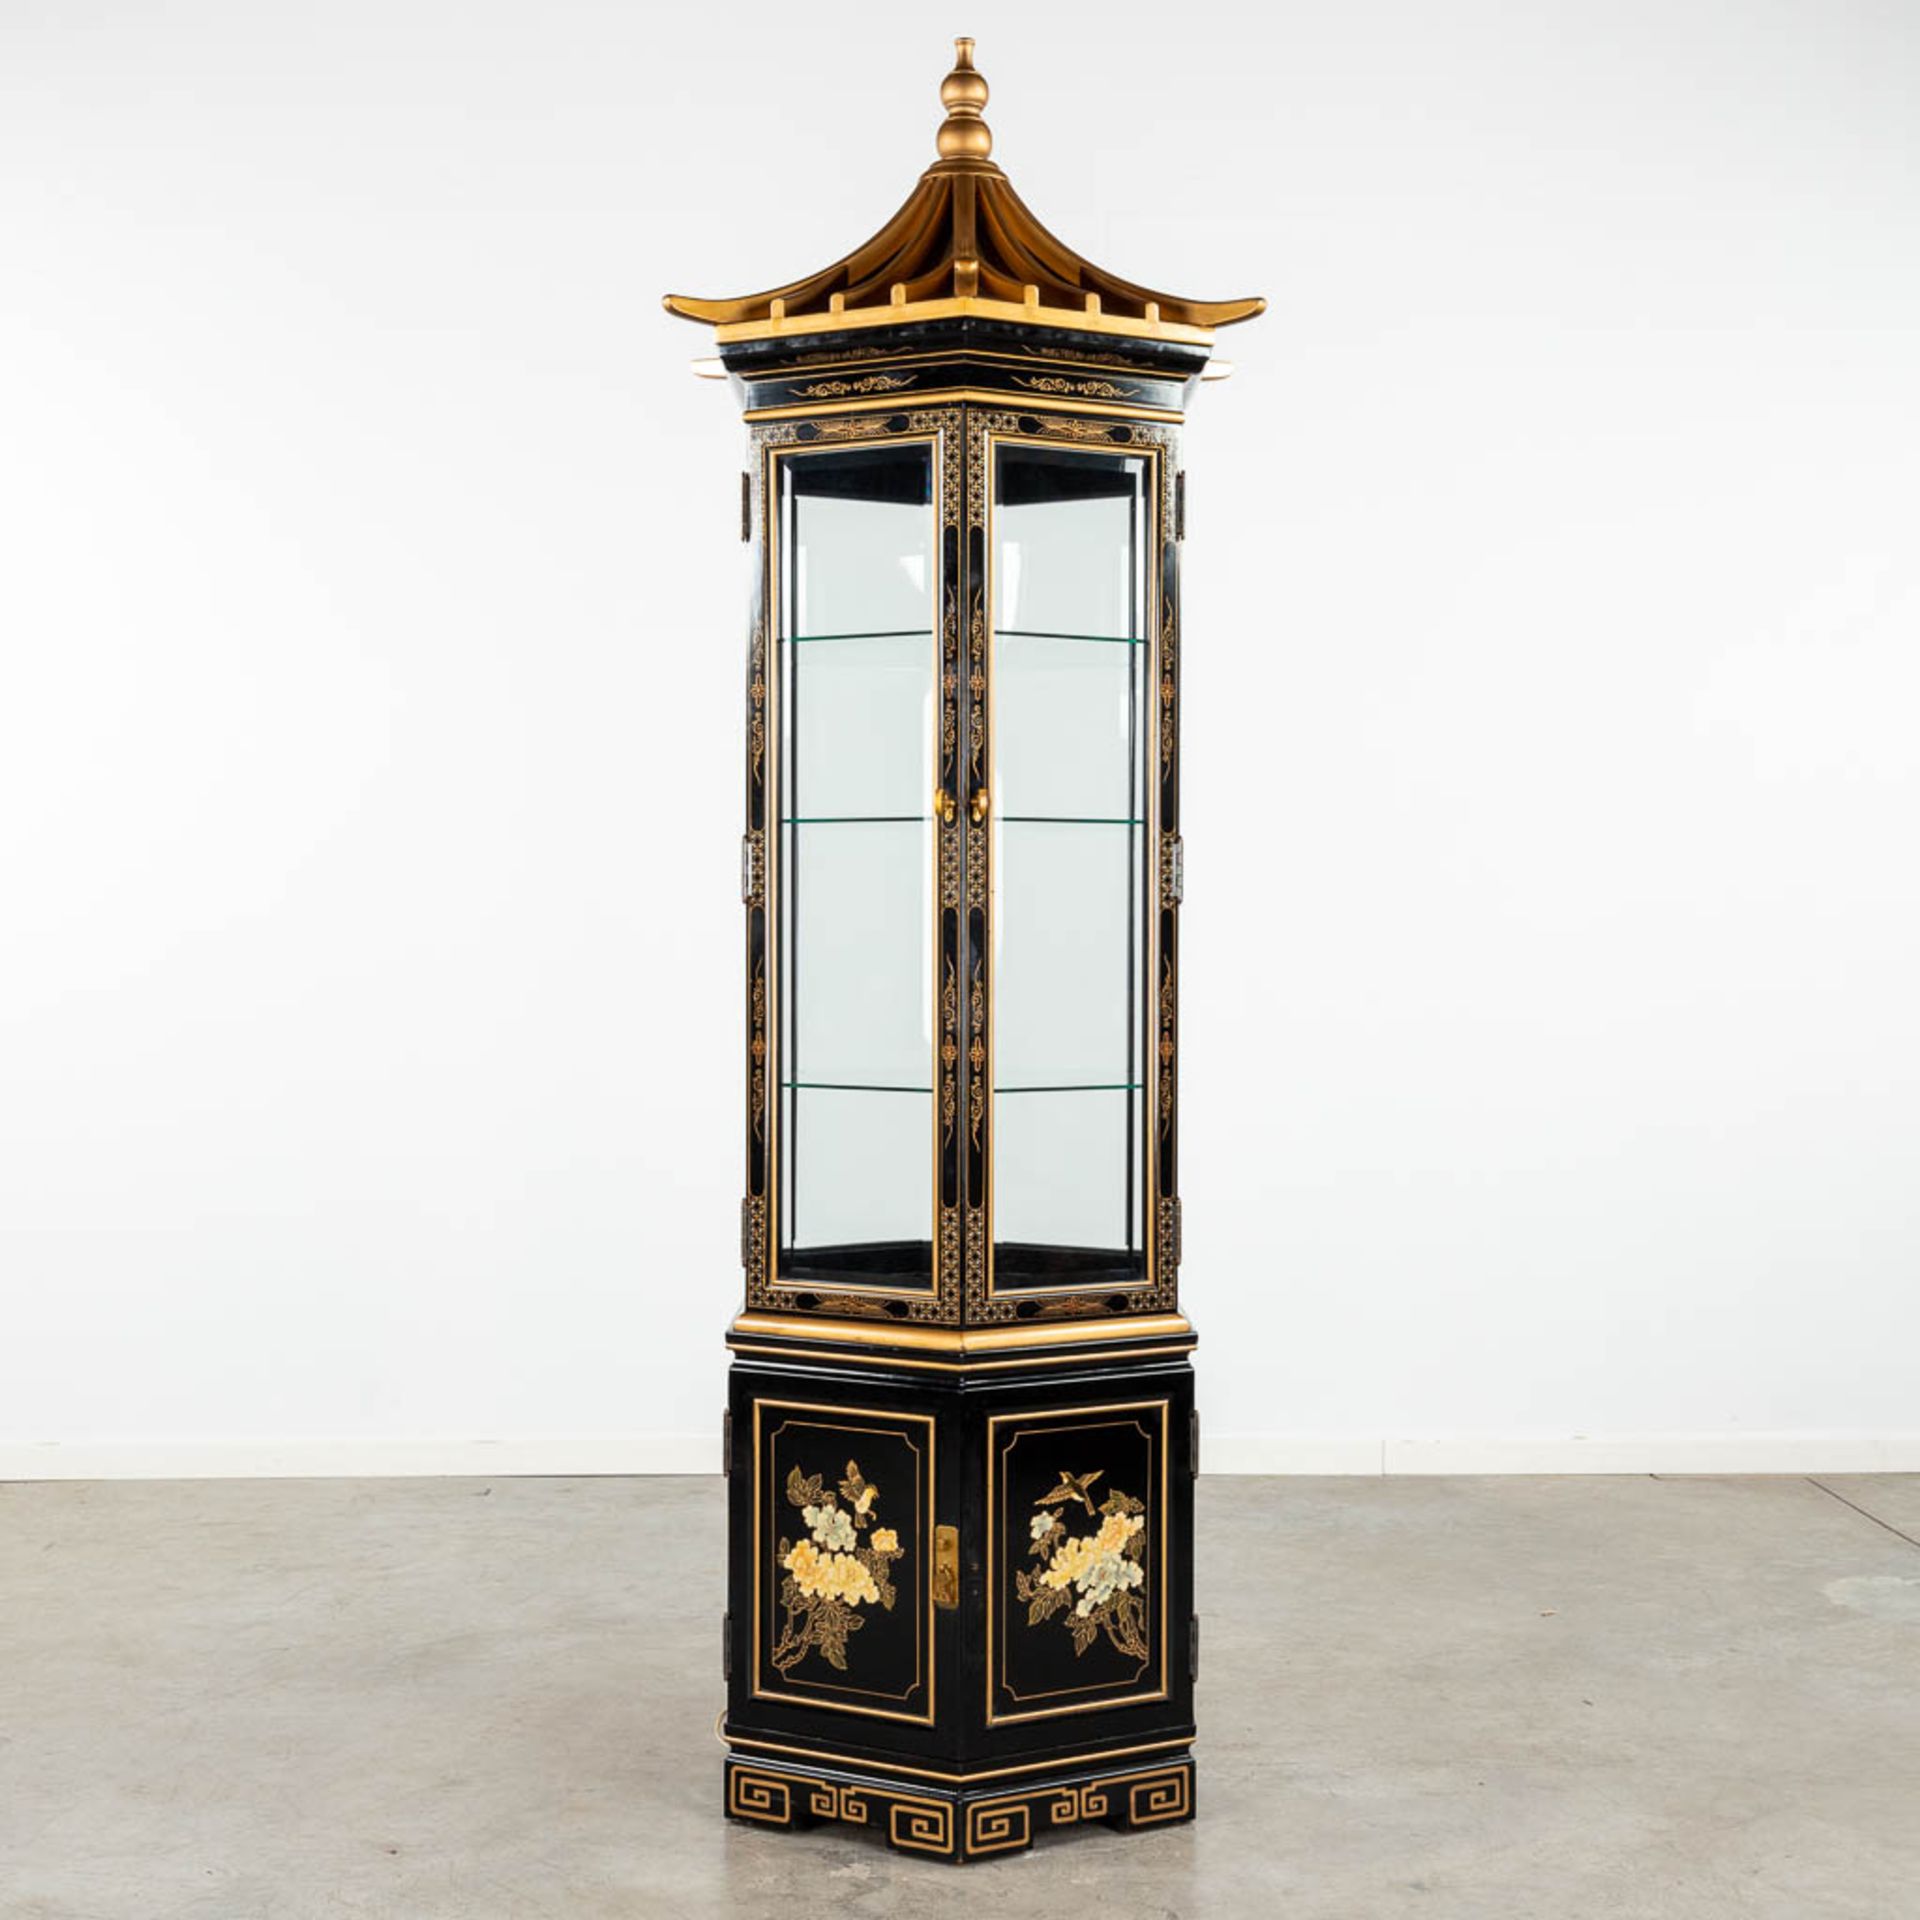 A large hexagonal display cabinet with Chinoiserie decor. 20th C. (H:220 x D:80 cm)